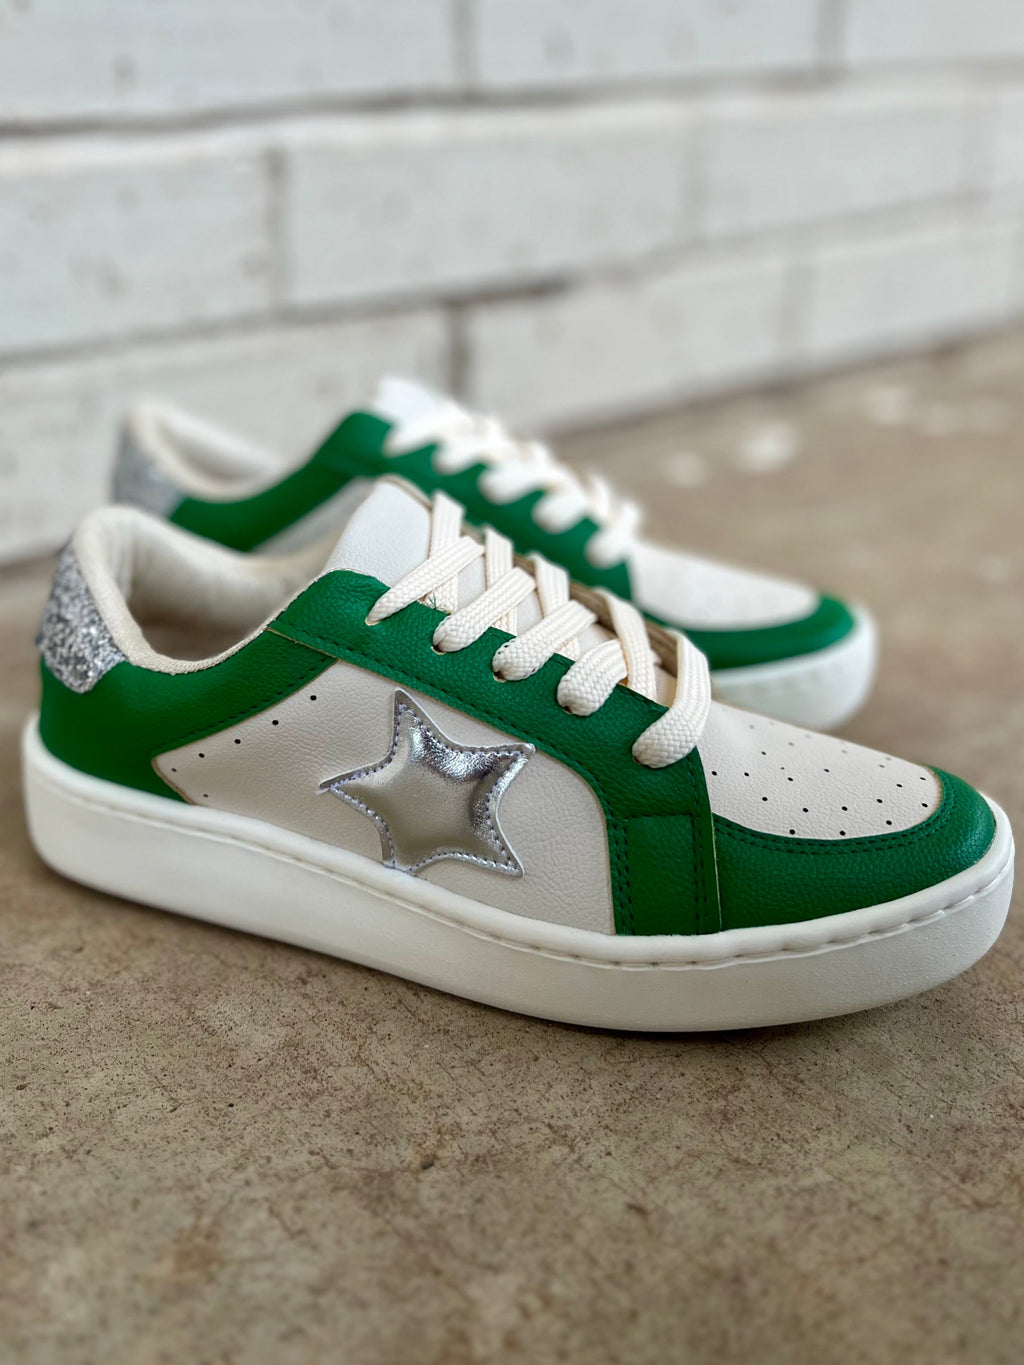 Green & Silver Game Day Sneakers | gussieduponline